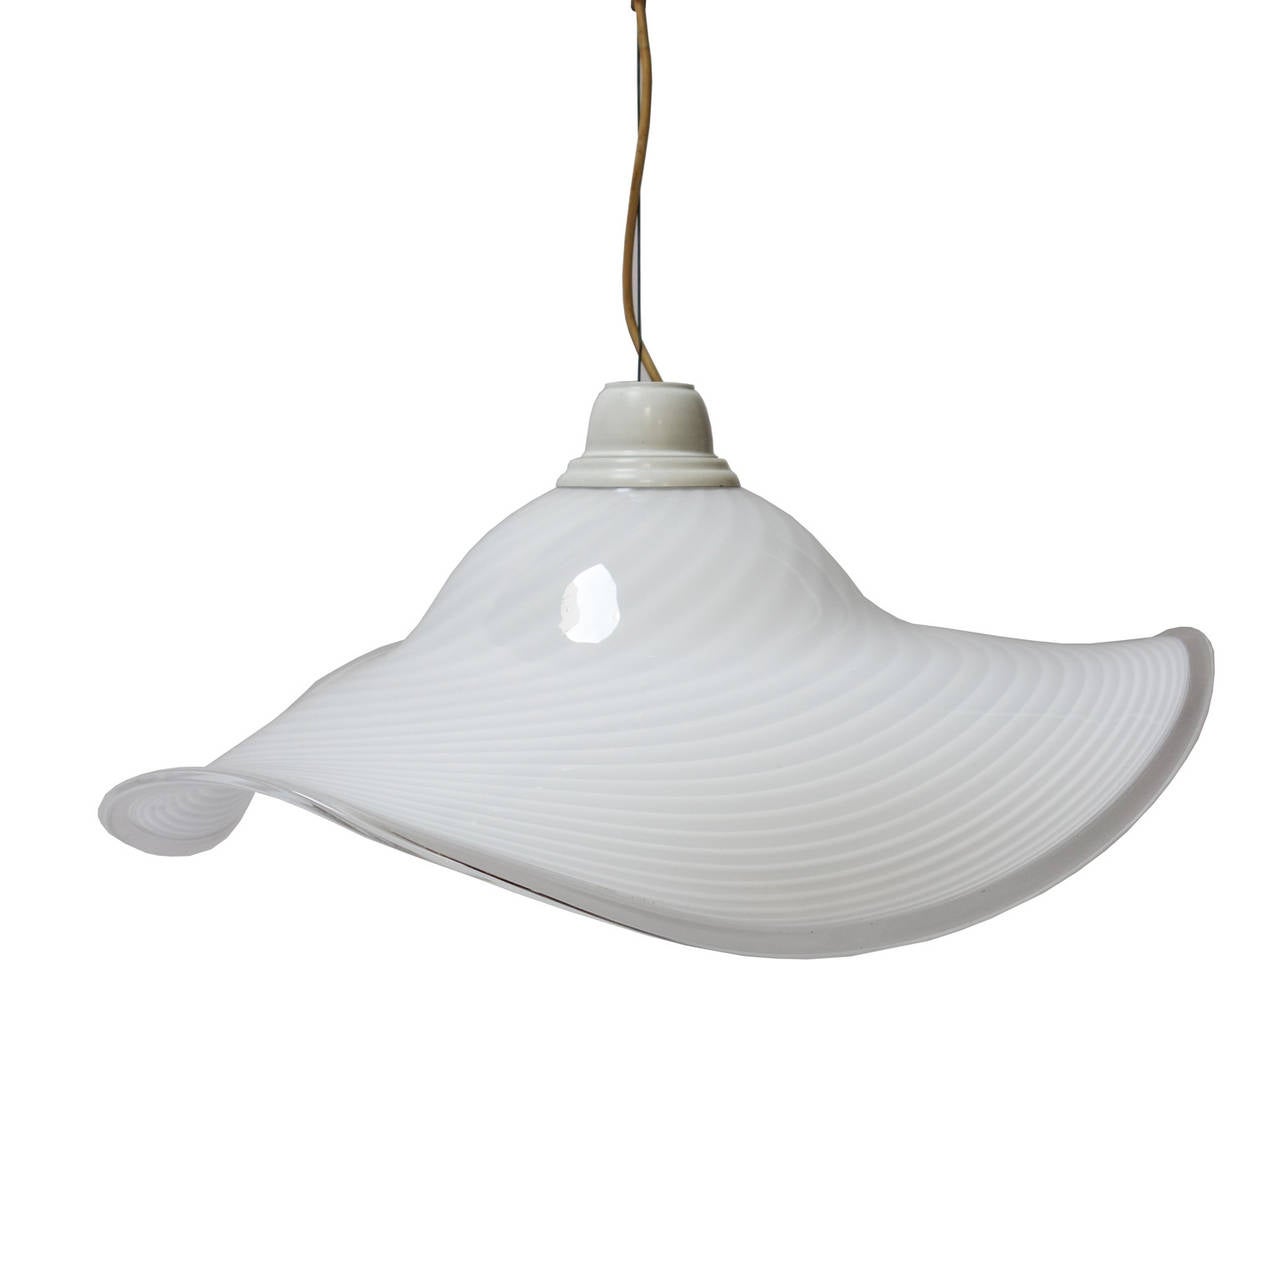 Fantastic Murano glass hanging fixture featuring a hand blown handkerchief form with white painted metal fitting, and brass details. Adjustable height.

Original electrical wiring, could be replaced if requested.